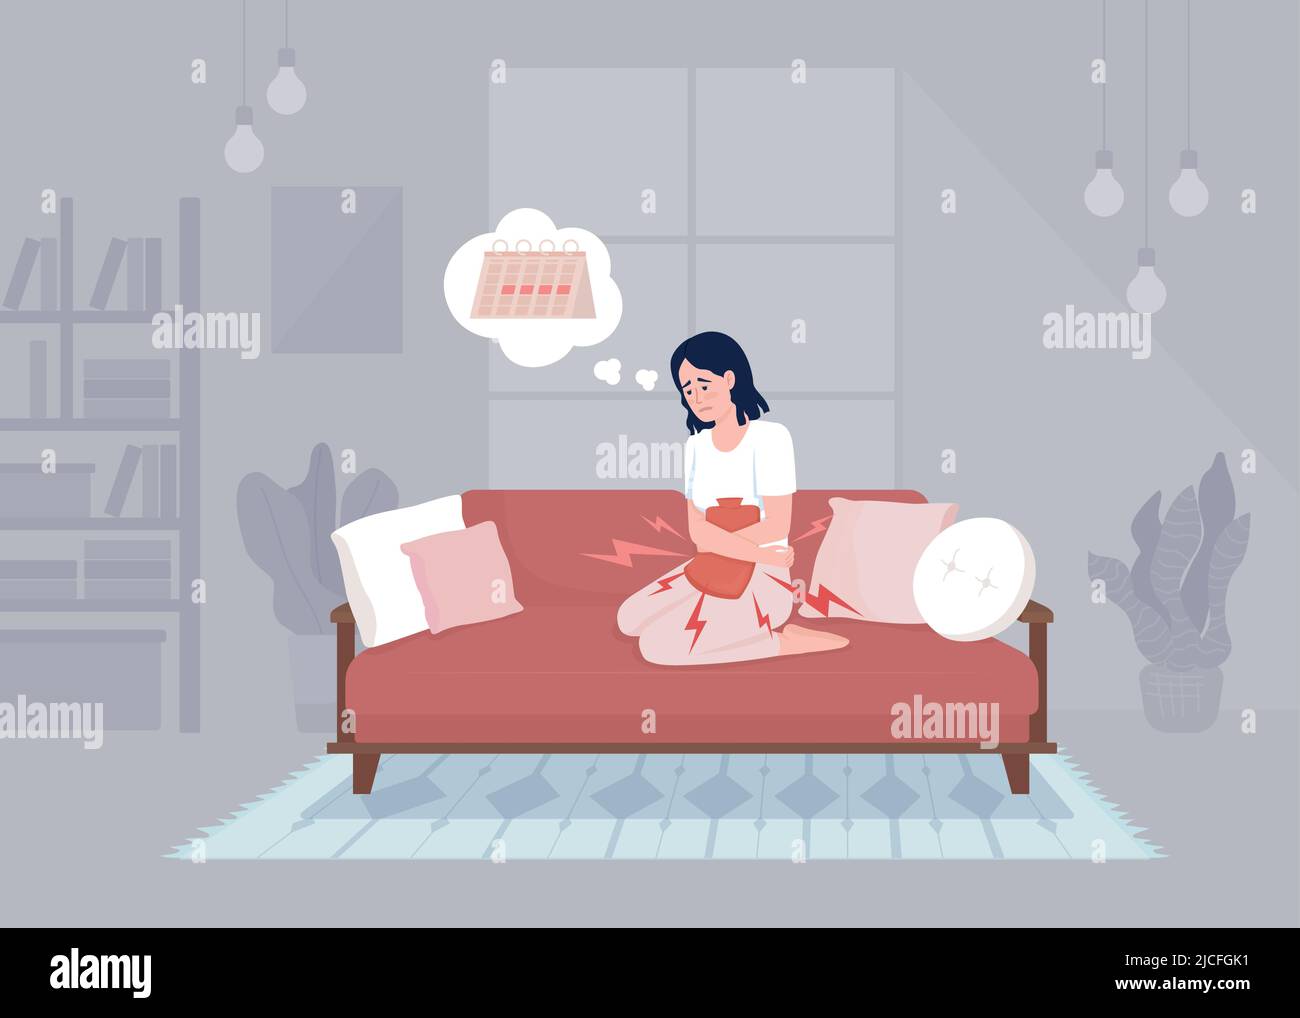 Period pain hot water bottle Stock Vector Images - Alamy